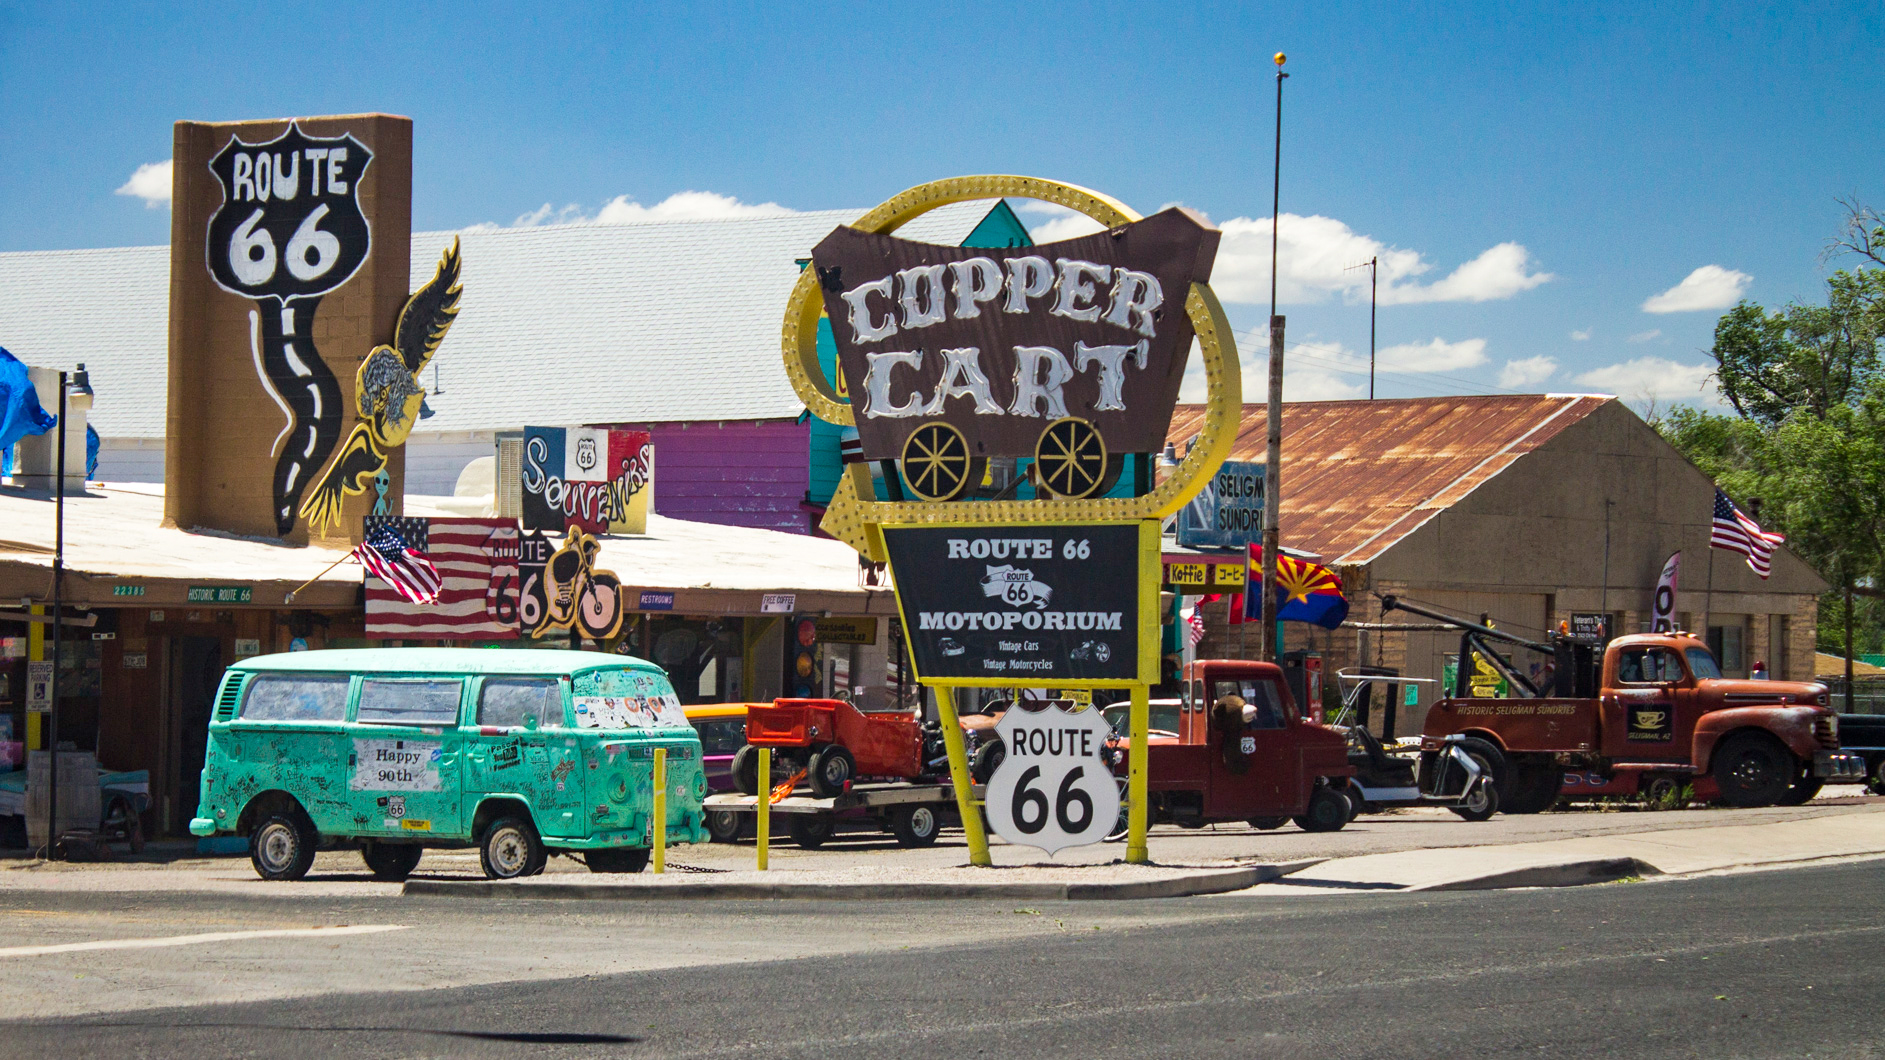 Route 66 is home to tons of old-school roadside treasures that would likely die off without preservation. | Nicole James photo